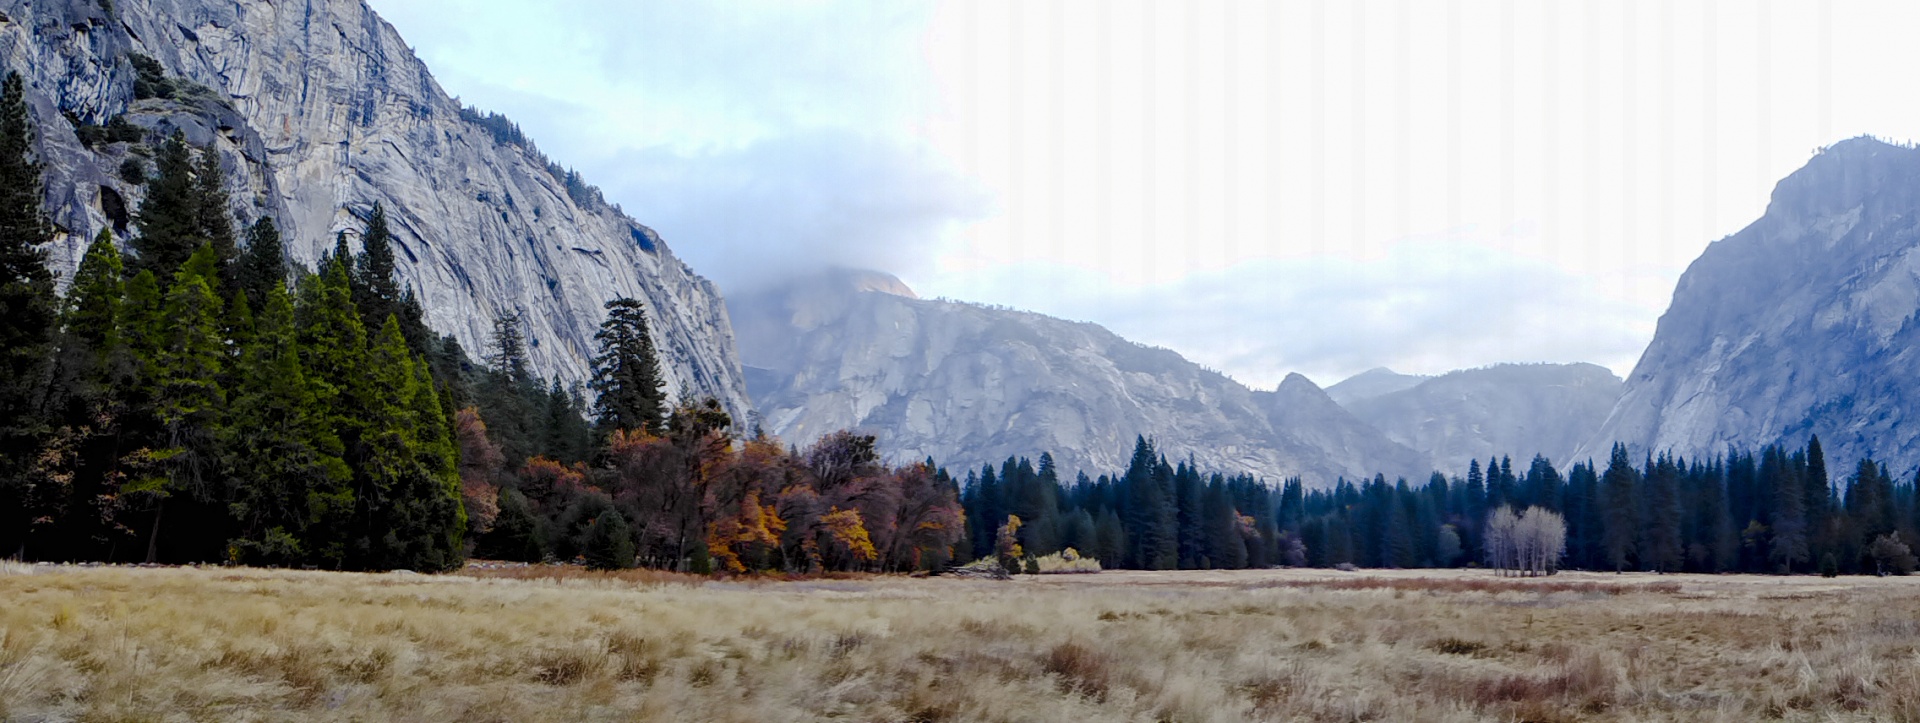 Panoramic view of grassy meadow at Yosemite in the Fall